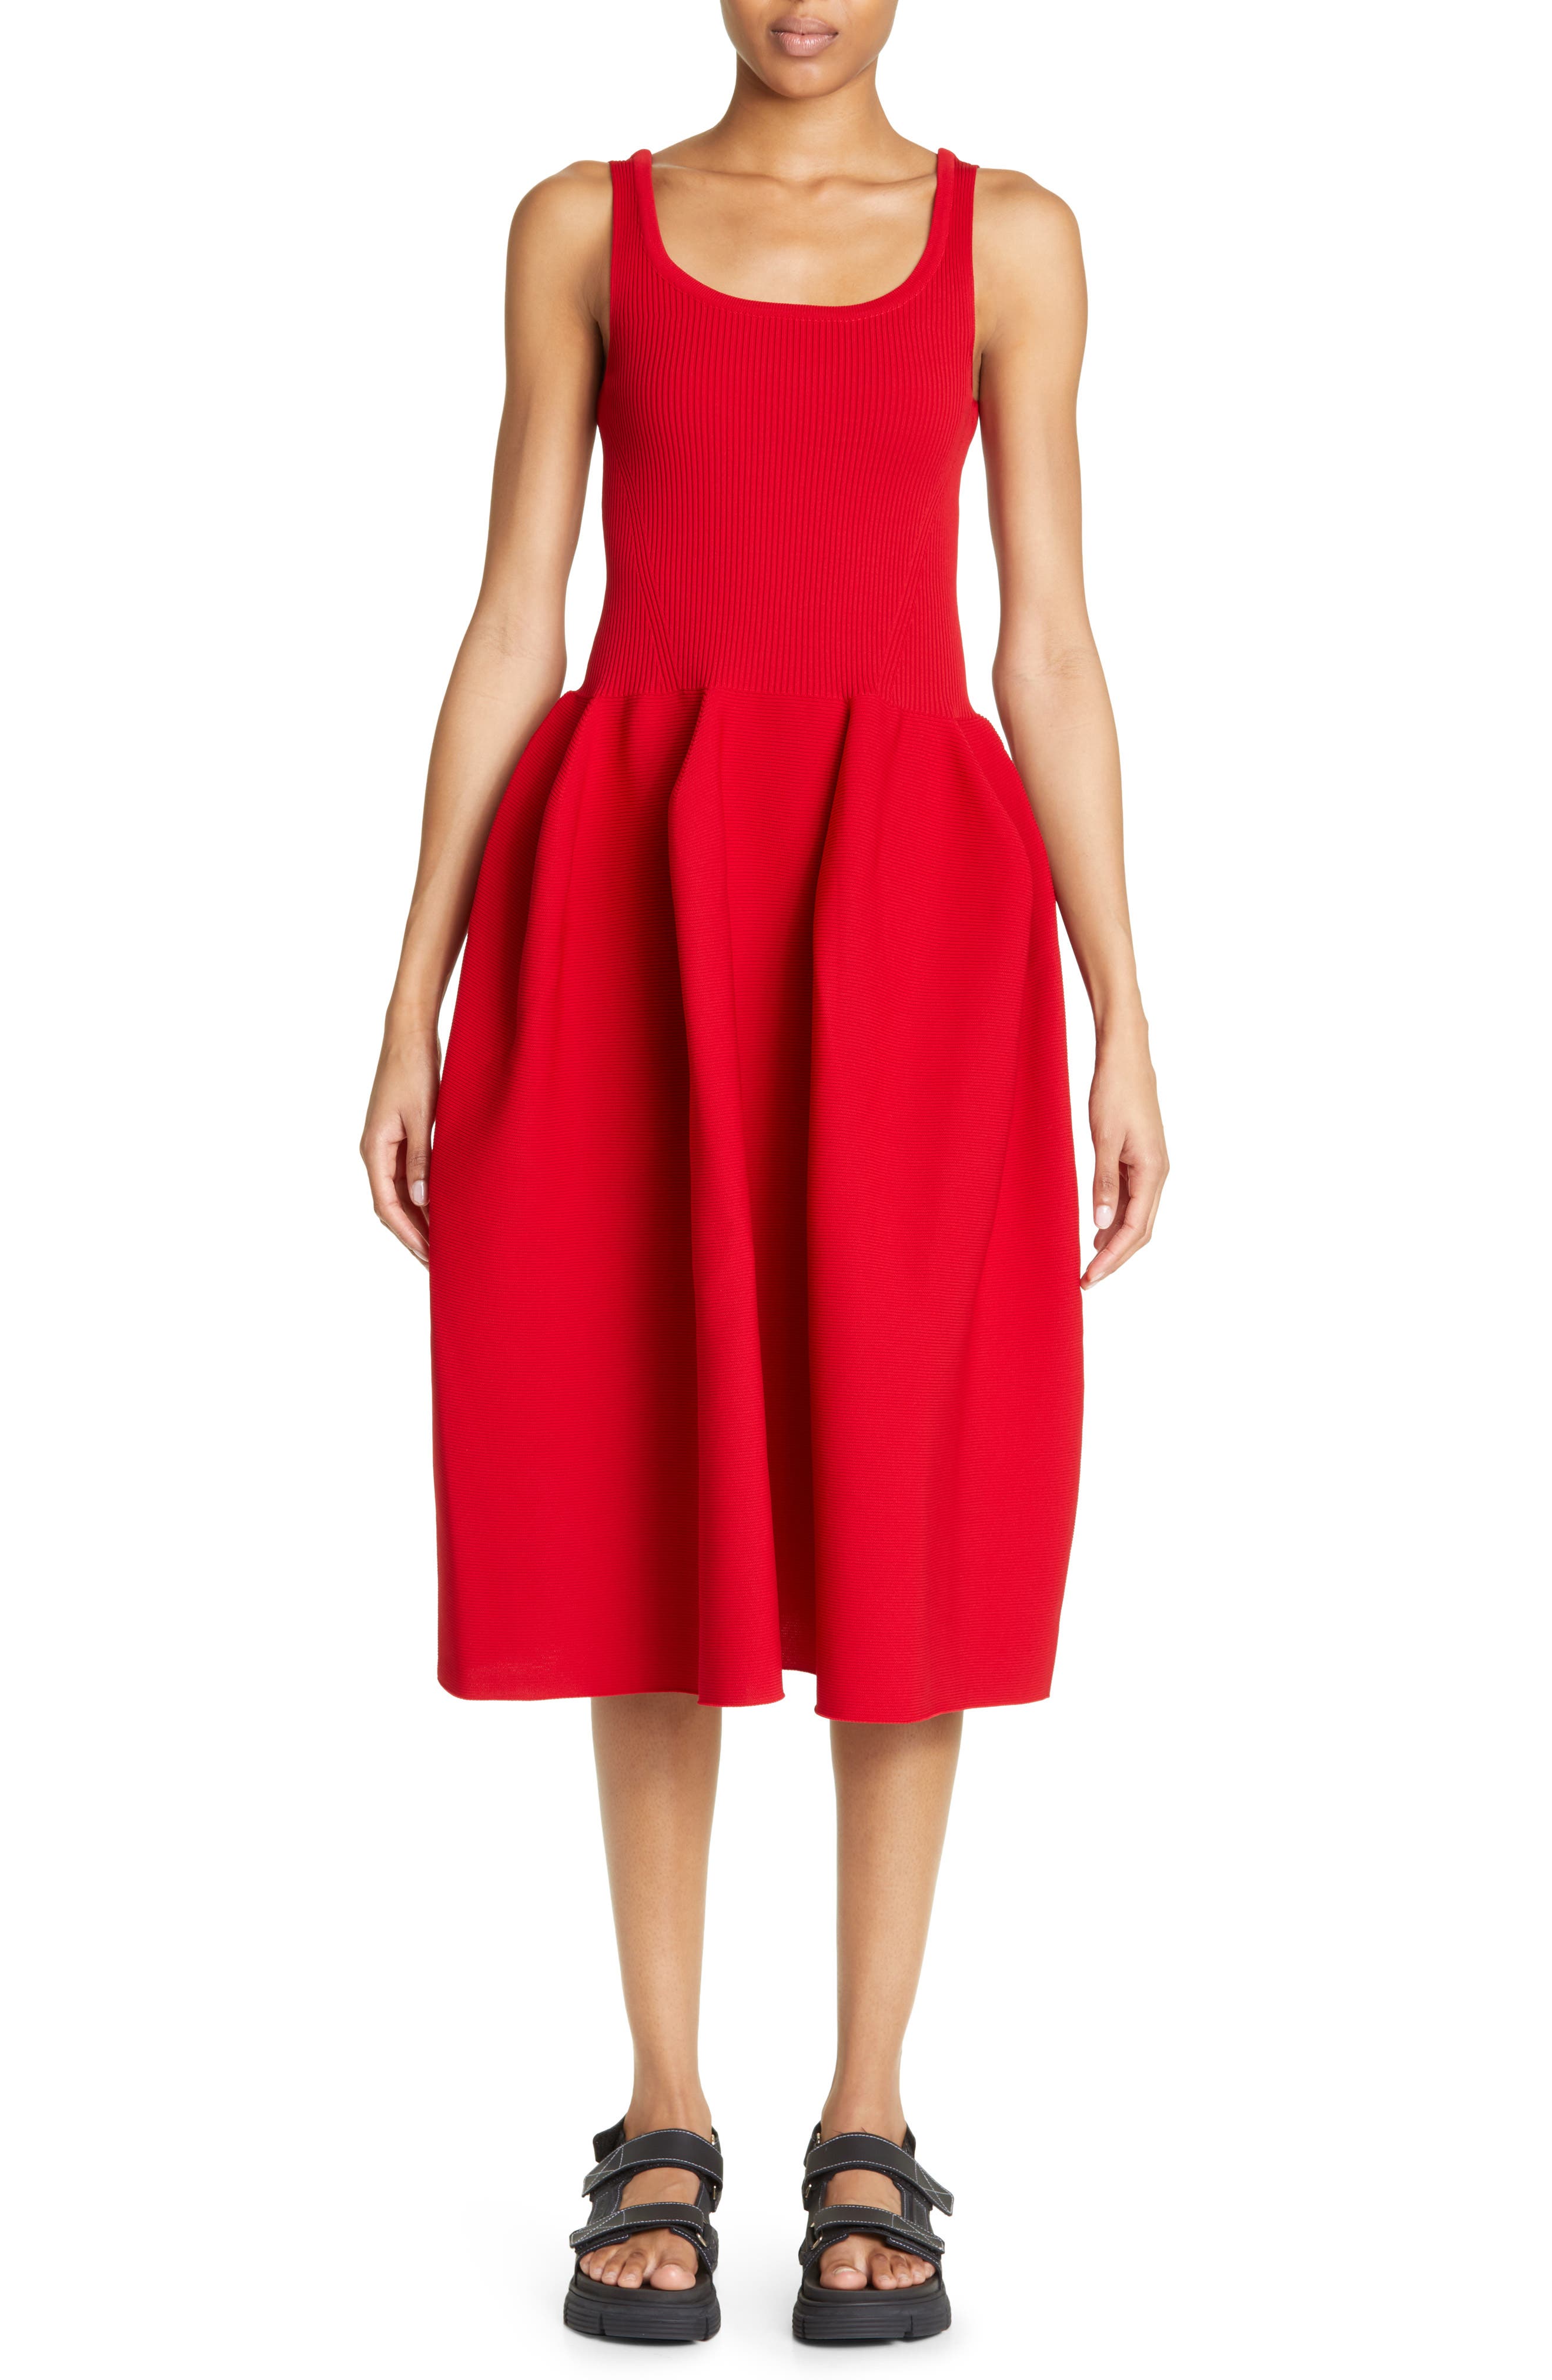 CFCL Pottery 1 Scoop Neck Fit & Flare Sweater Dress in Red | Smart